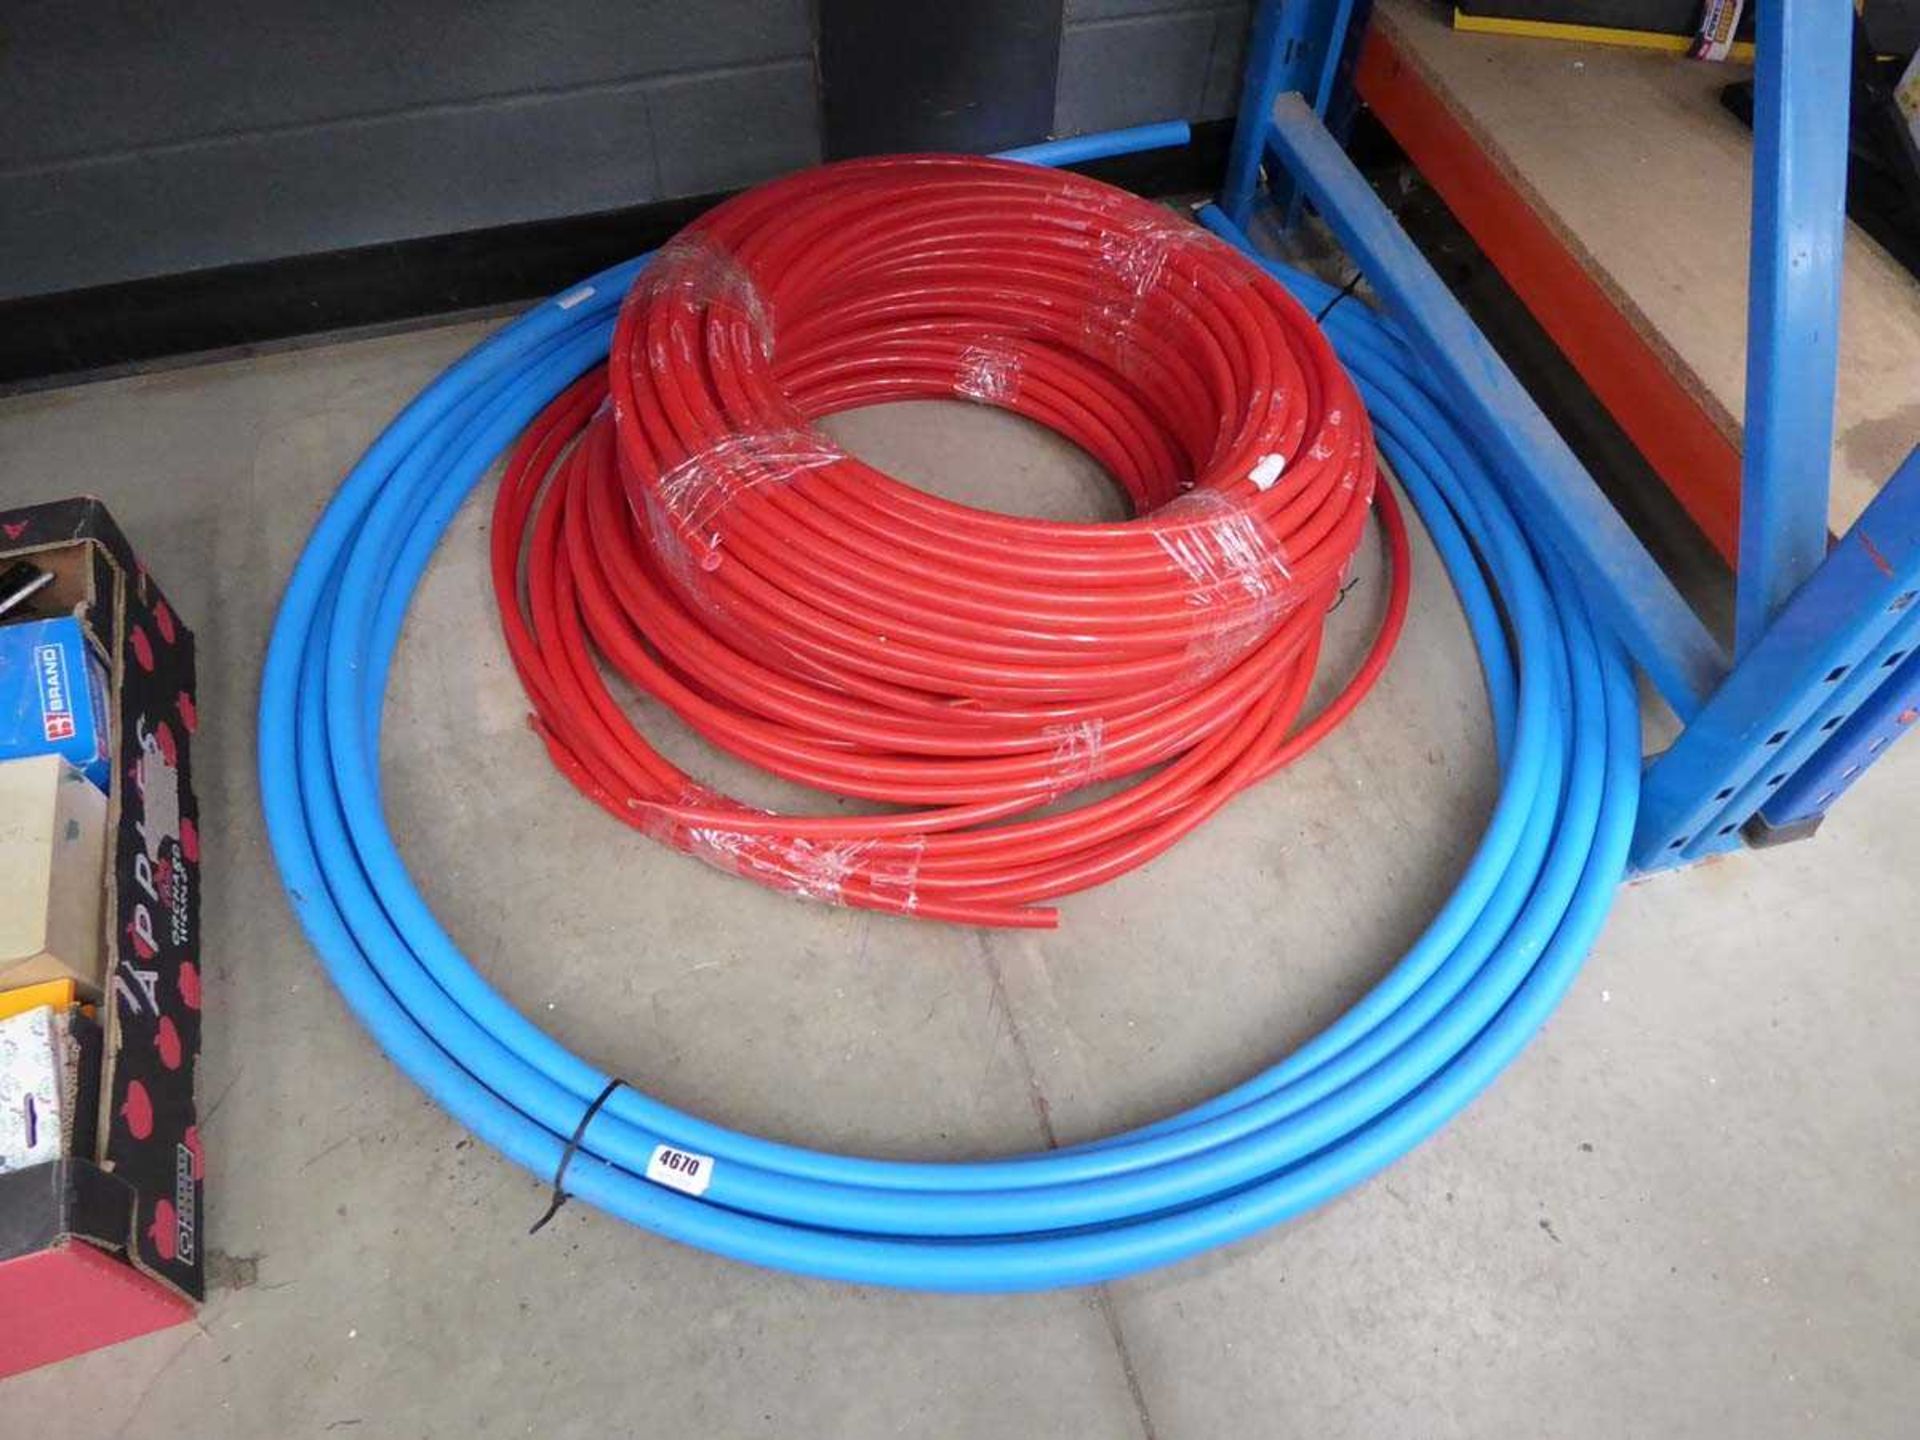 Three lengths of red hose, plus alkathene pipe